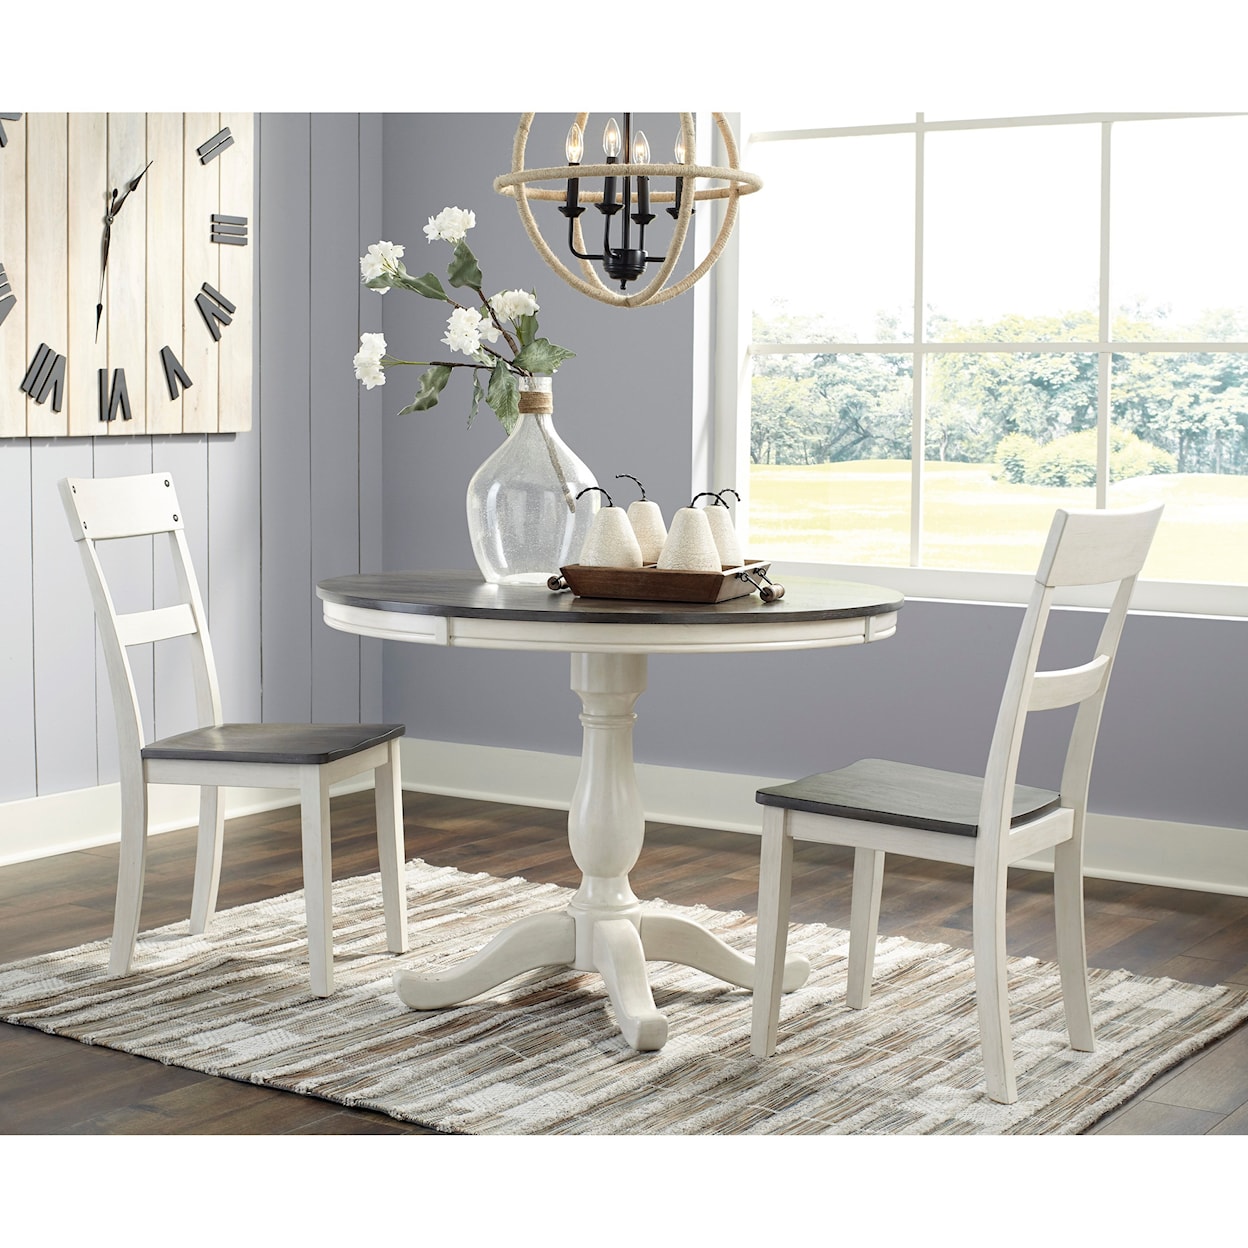 Benchcraft Nelling Dining Room Side Chair